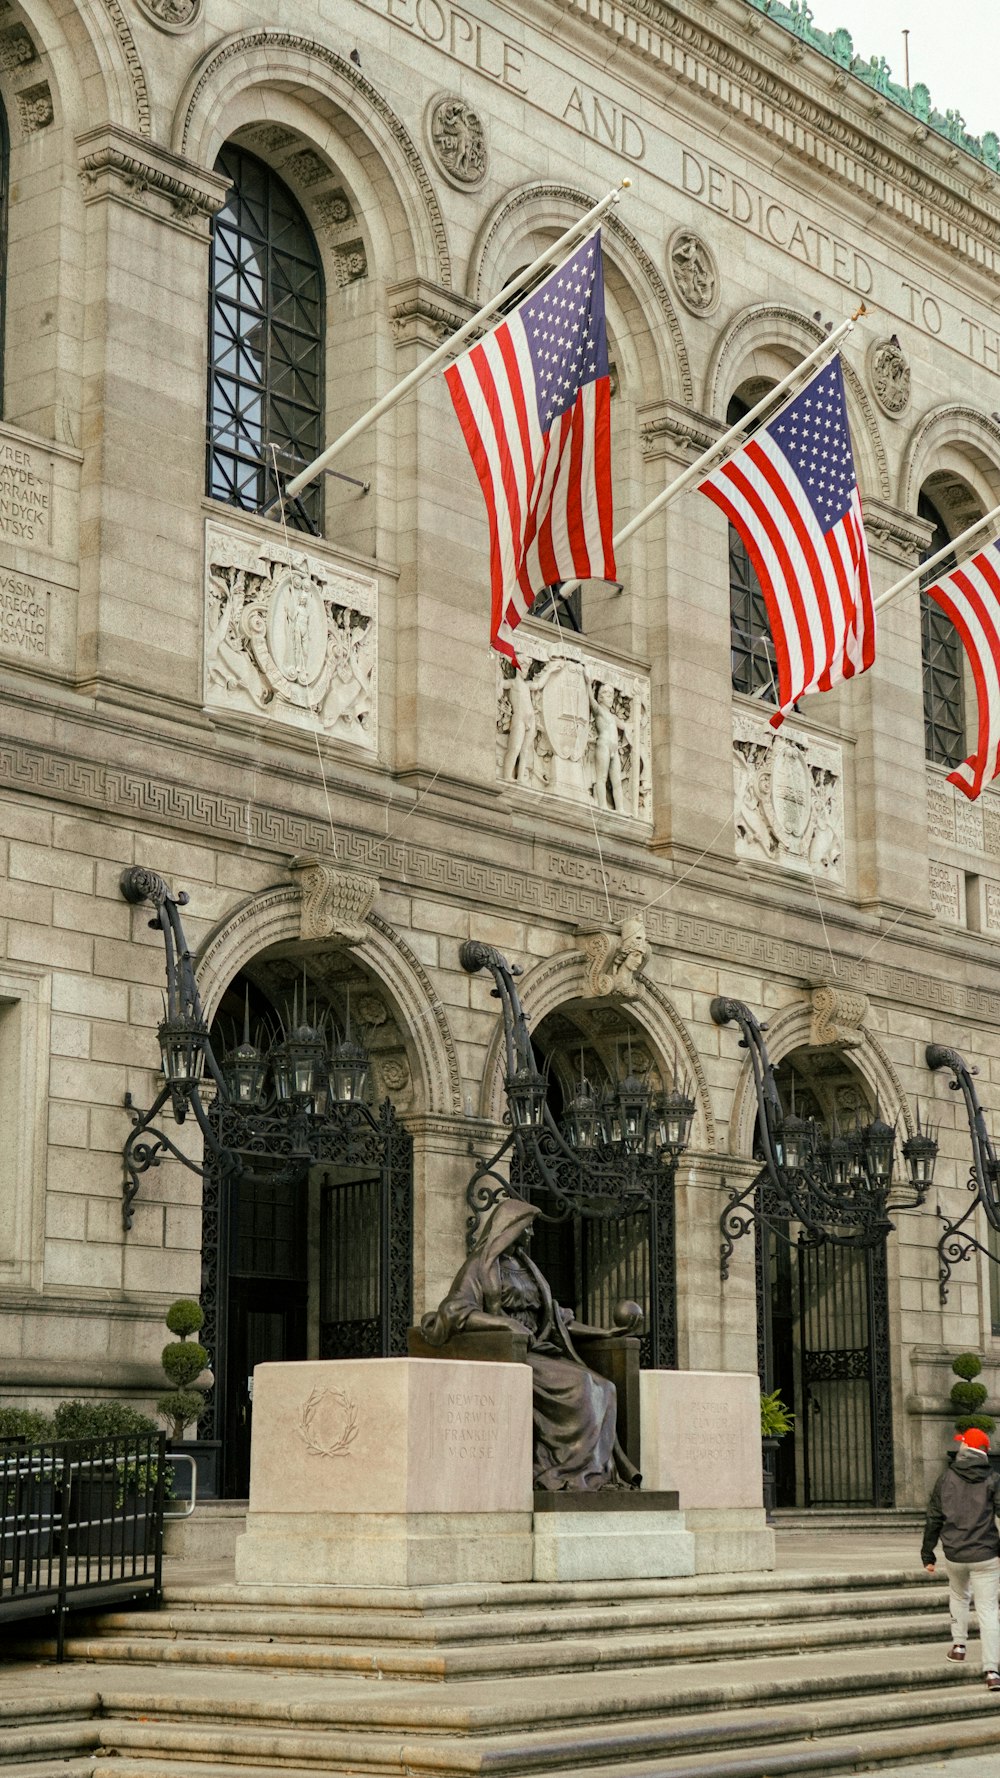 a statue of a man holding a flag in front of a building